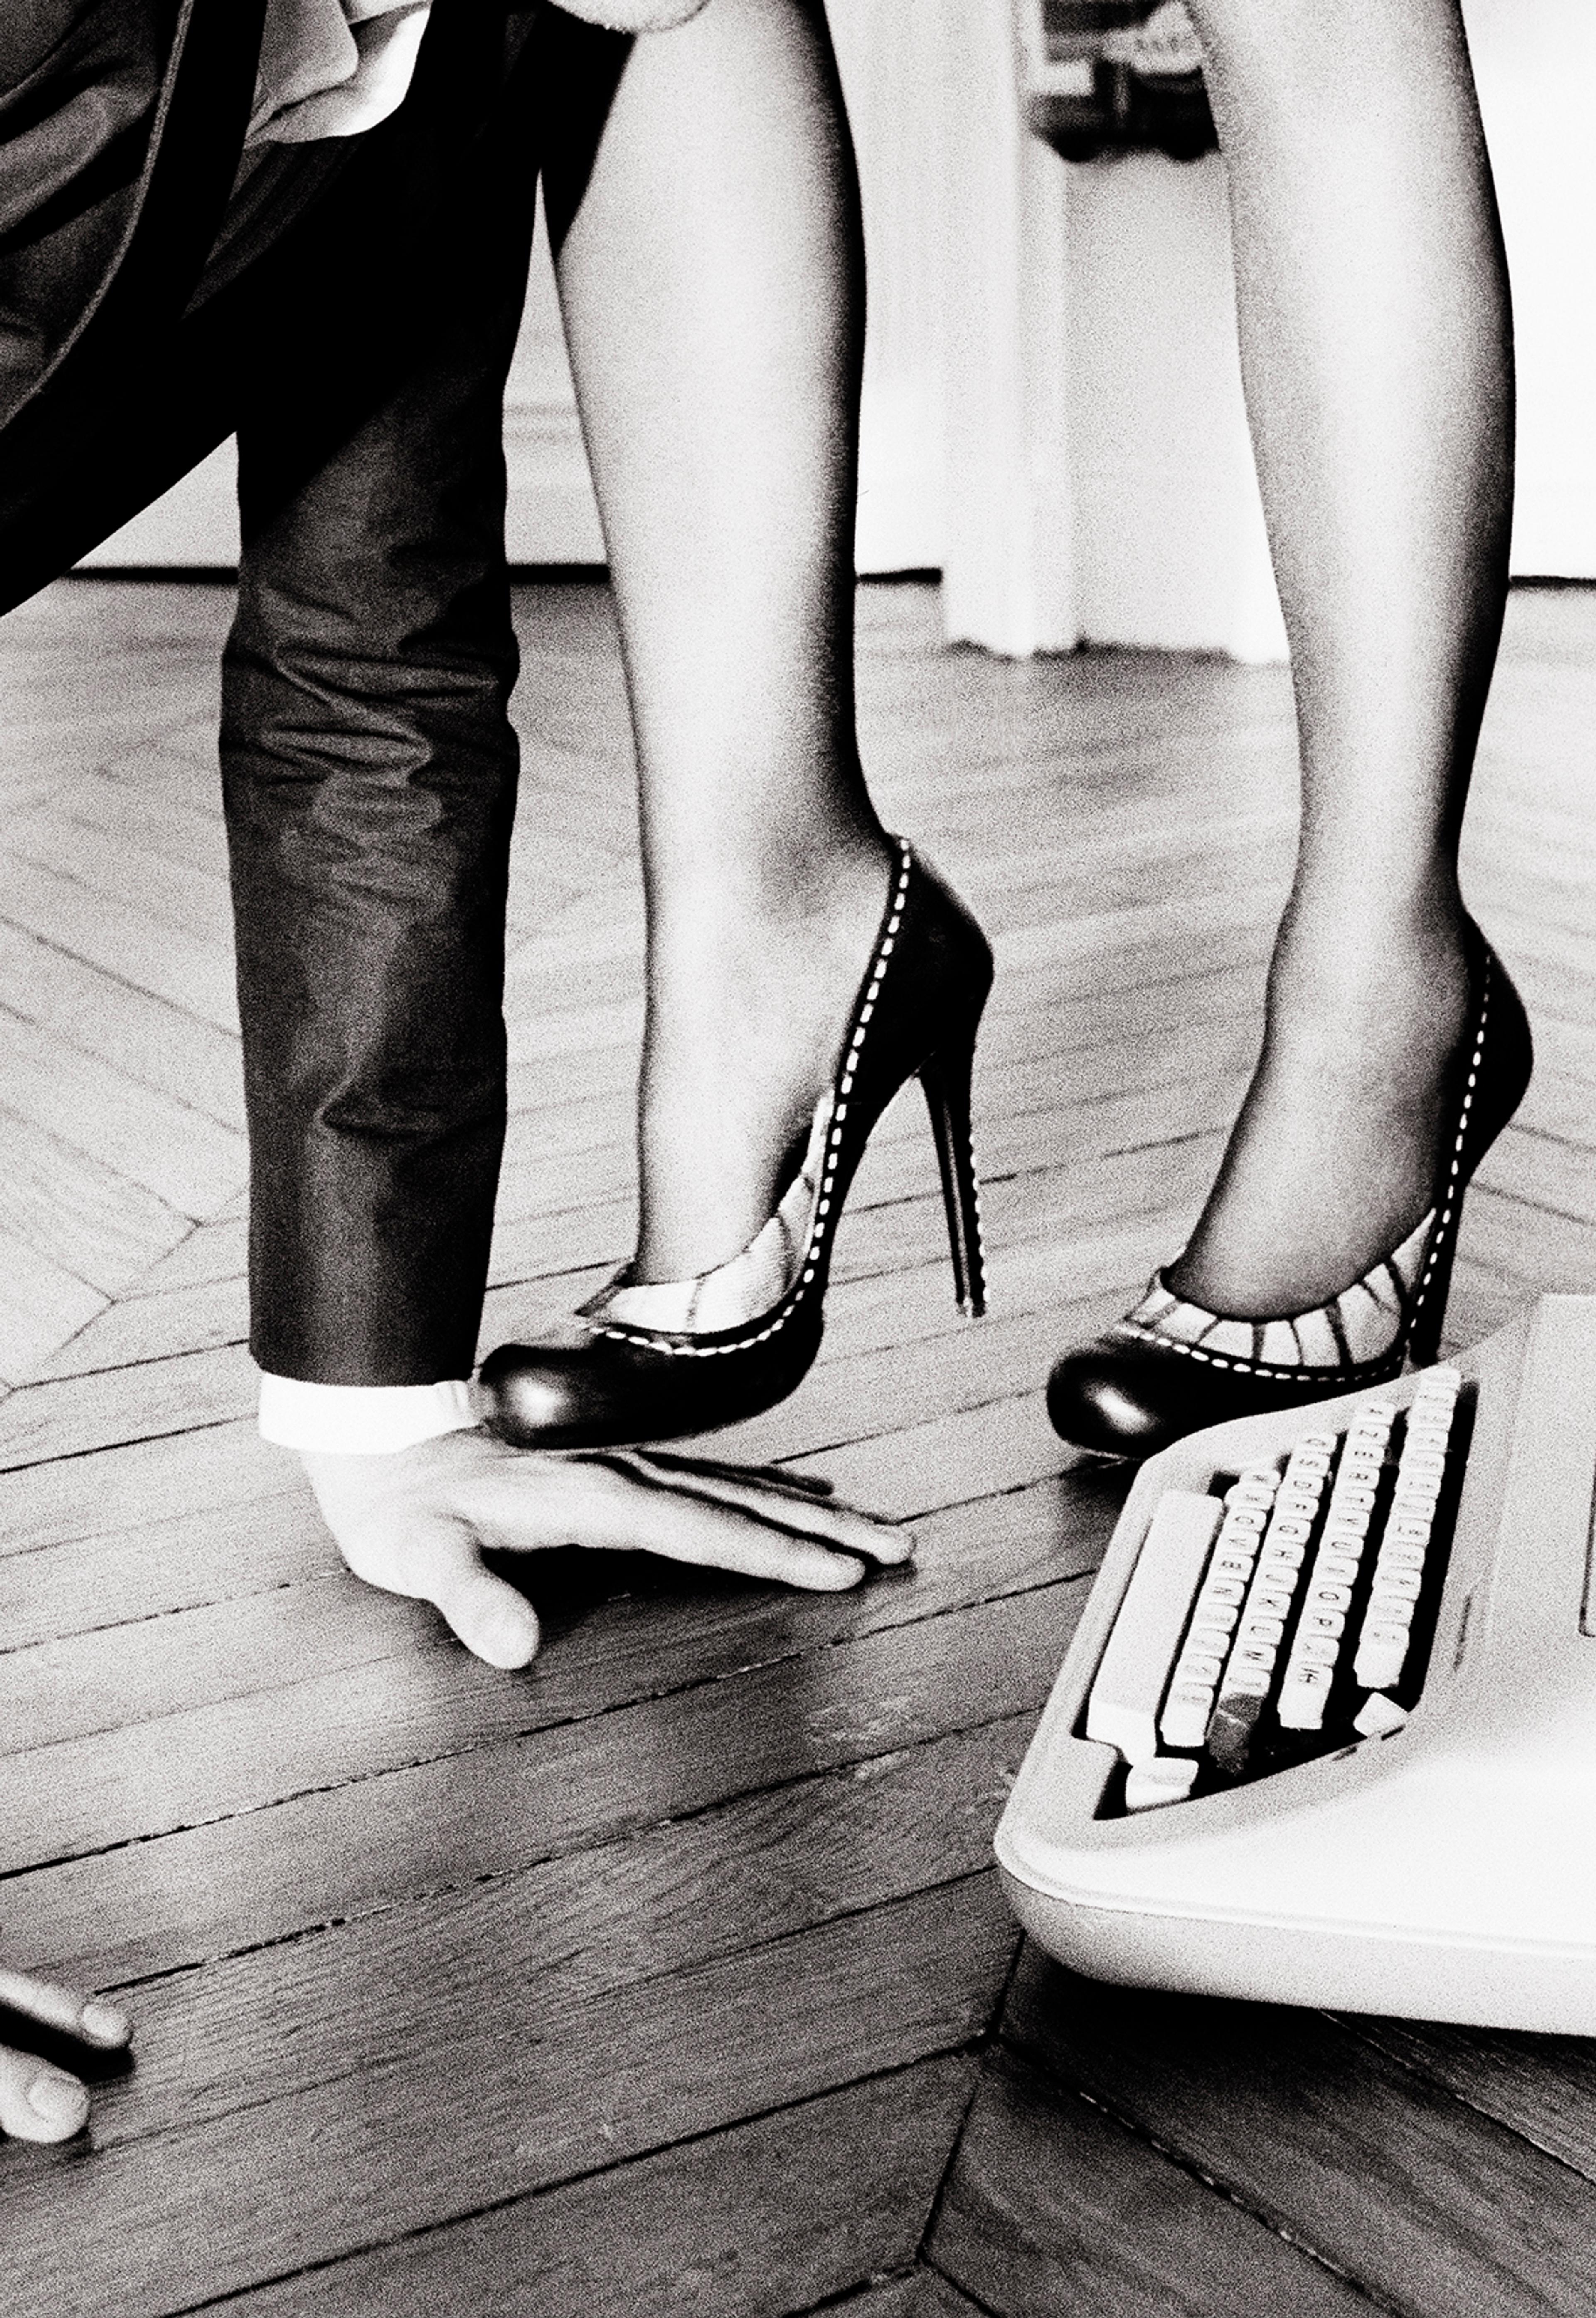 A black and white photograph of a woman's high-heeled toe stepping on a man's hand on the floor